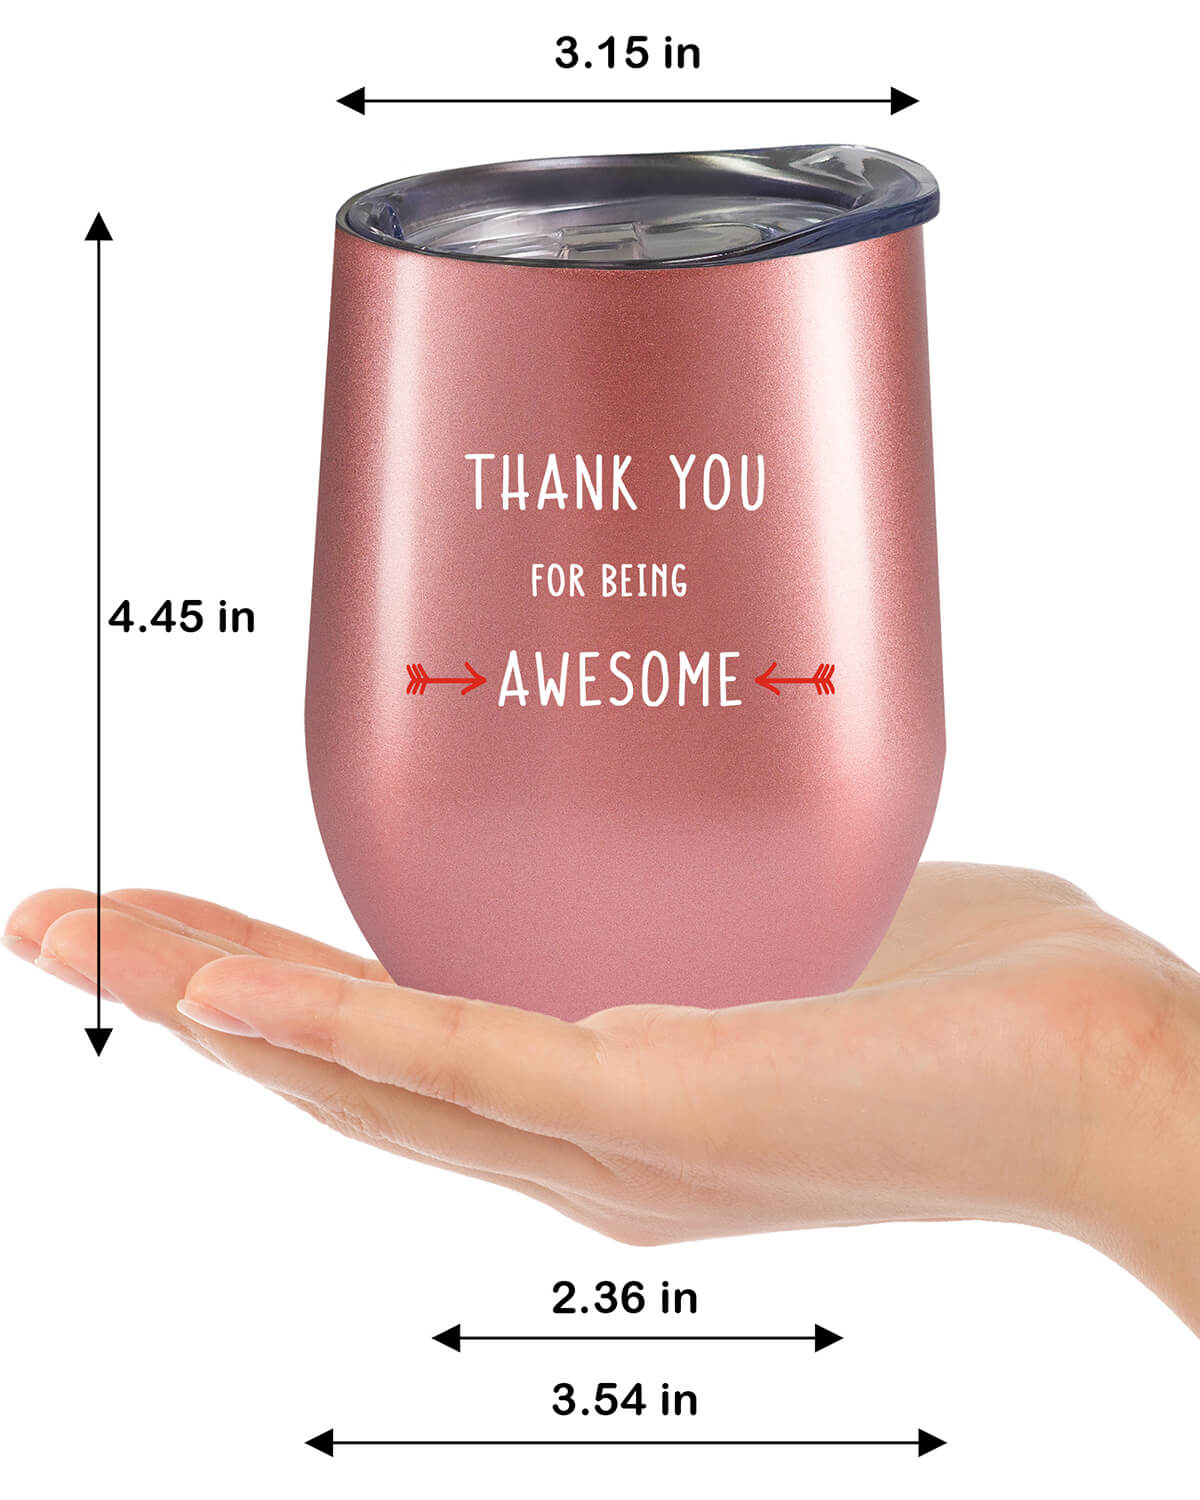 Appreciation Tumbler: 'Thank You for Being Awesome' 12 oz Stainless Steel Cup as a Thank You Gift - fancyfams